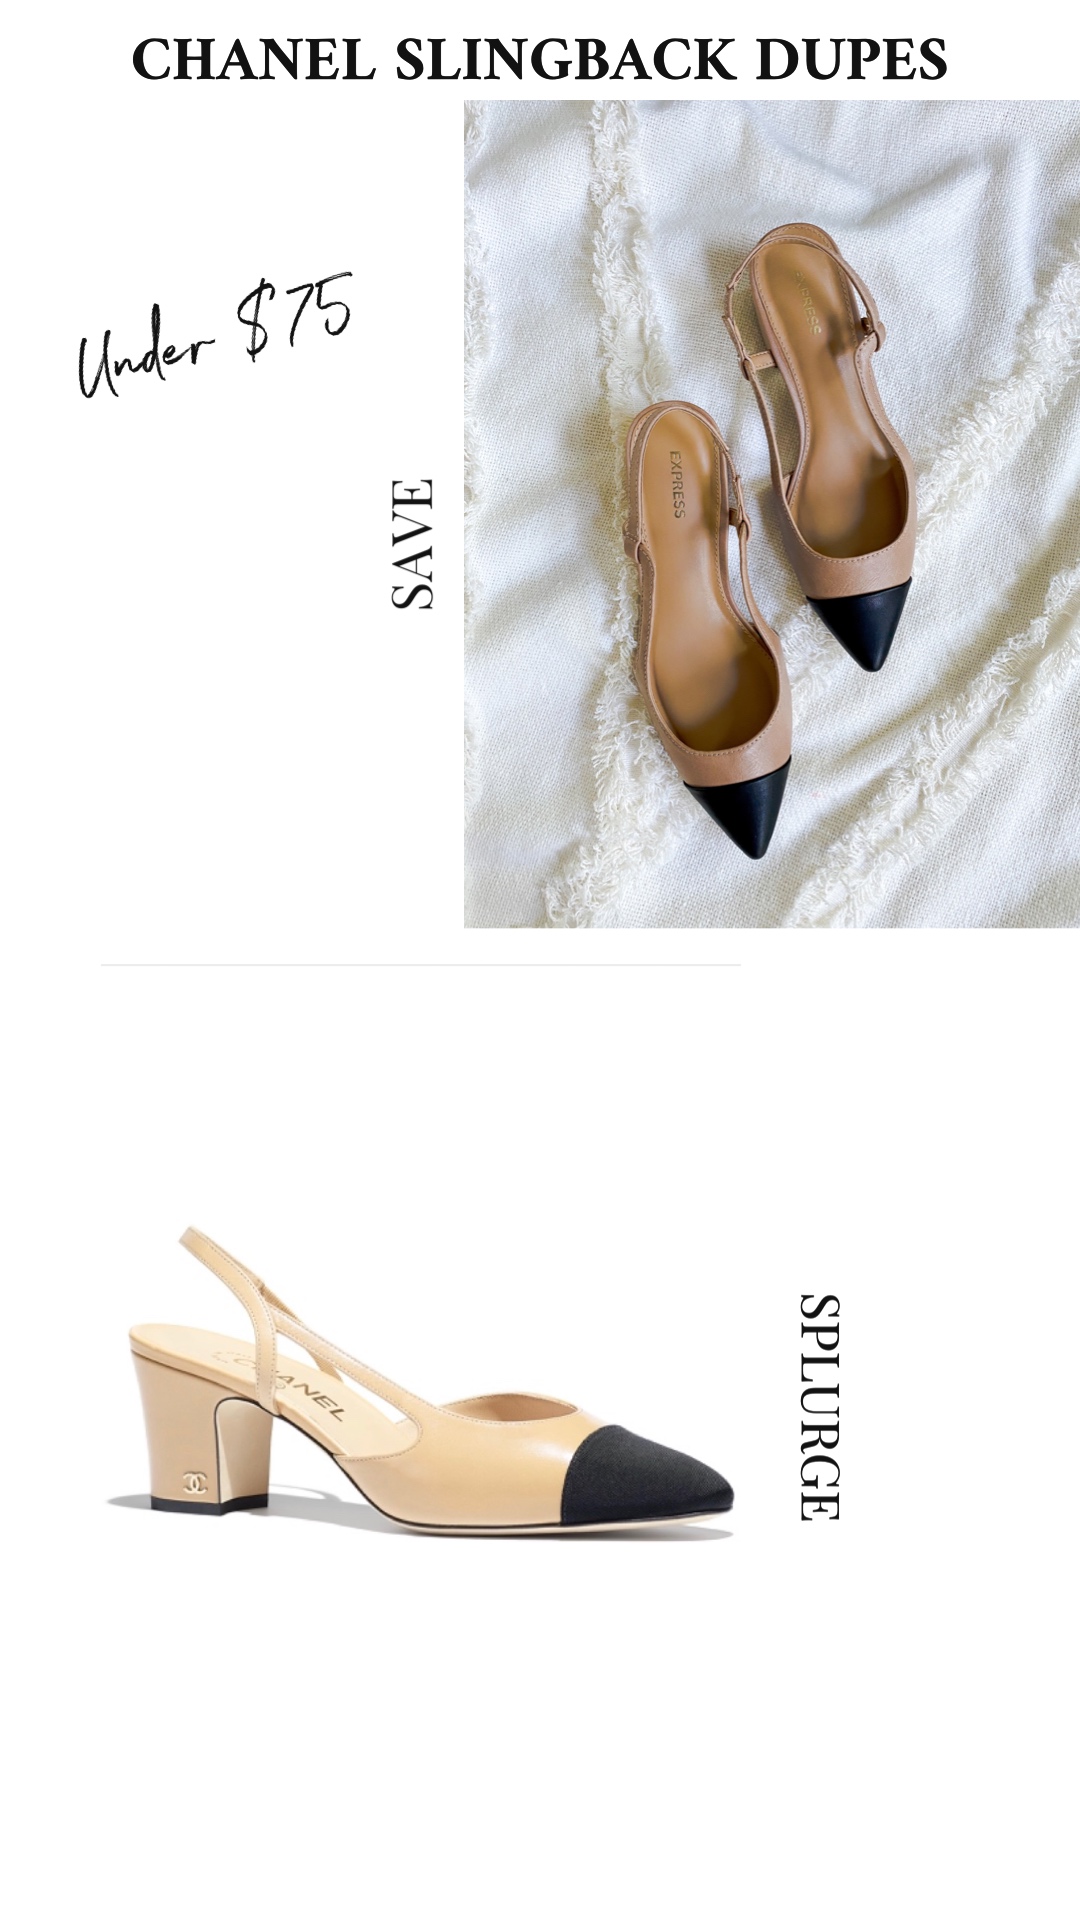 Chanel slingback dupes, Black and Tan shoes, best luxury dupes, Chanel dupes, gifts for her 